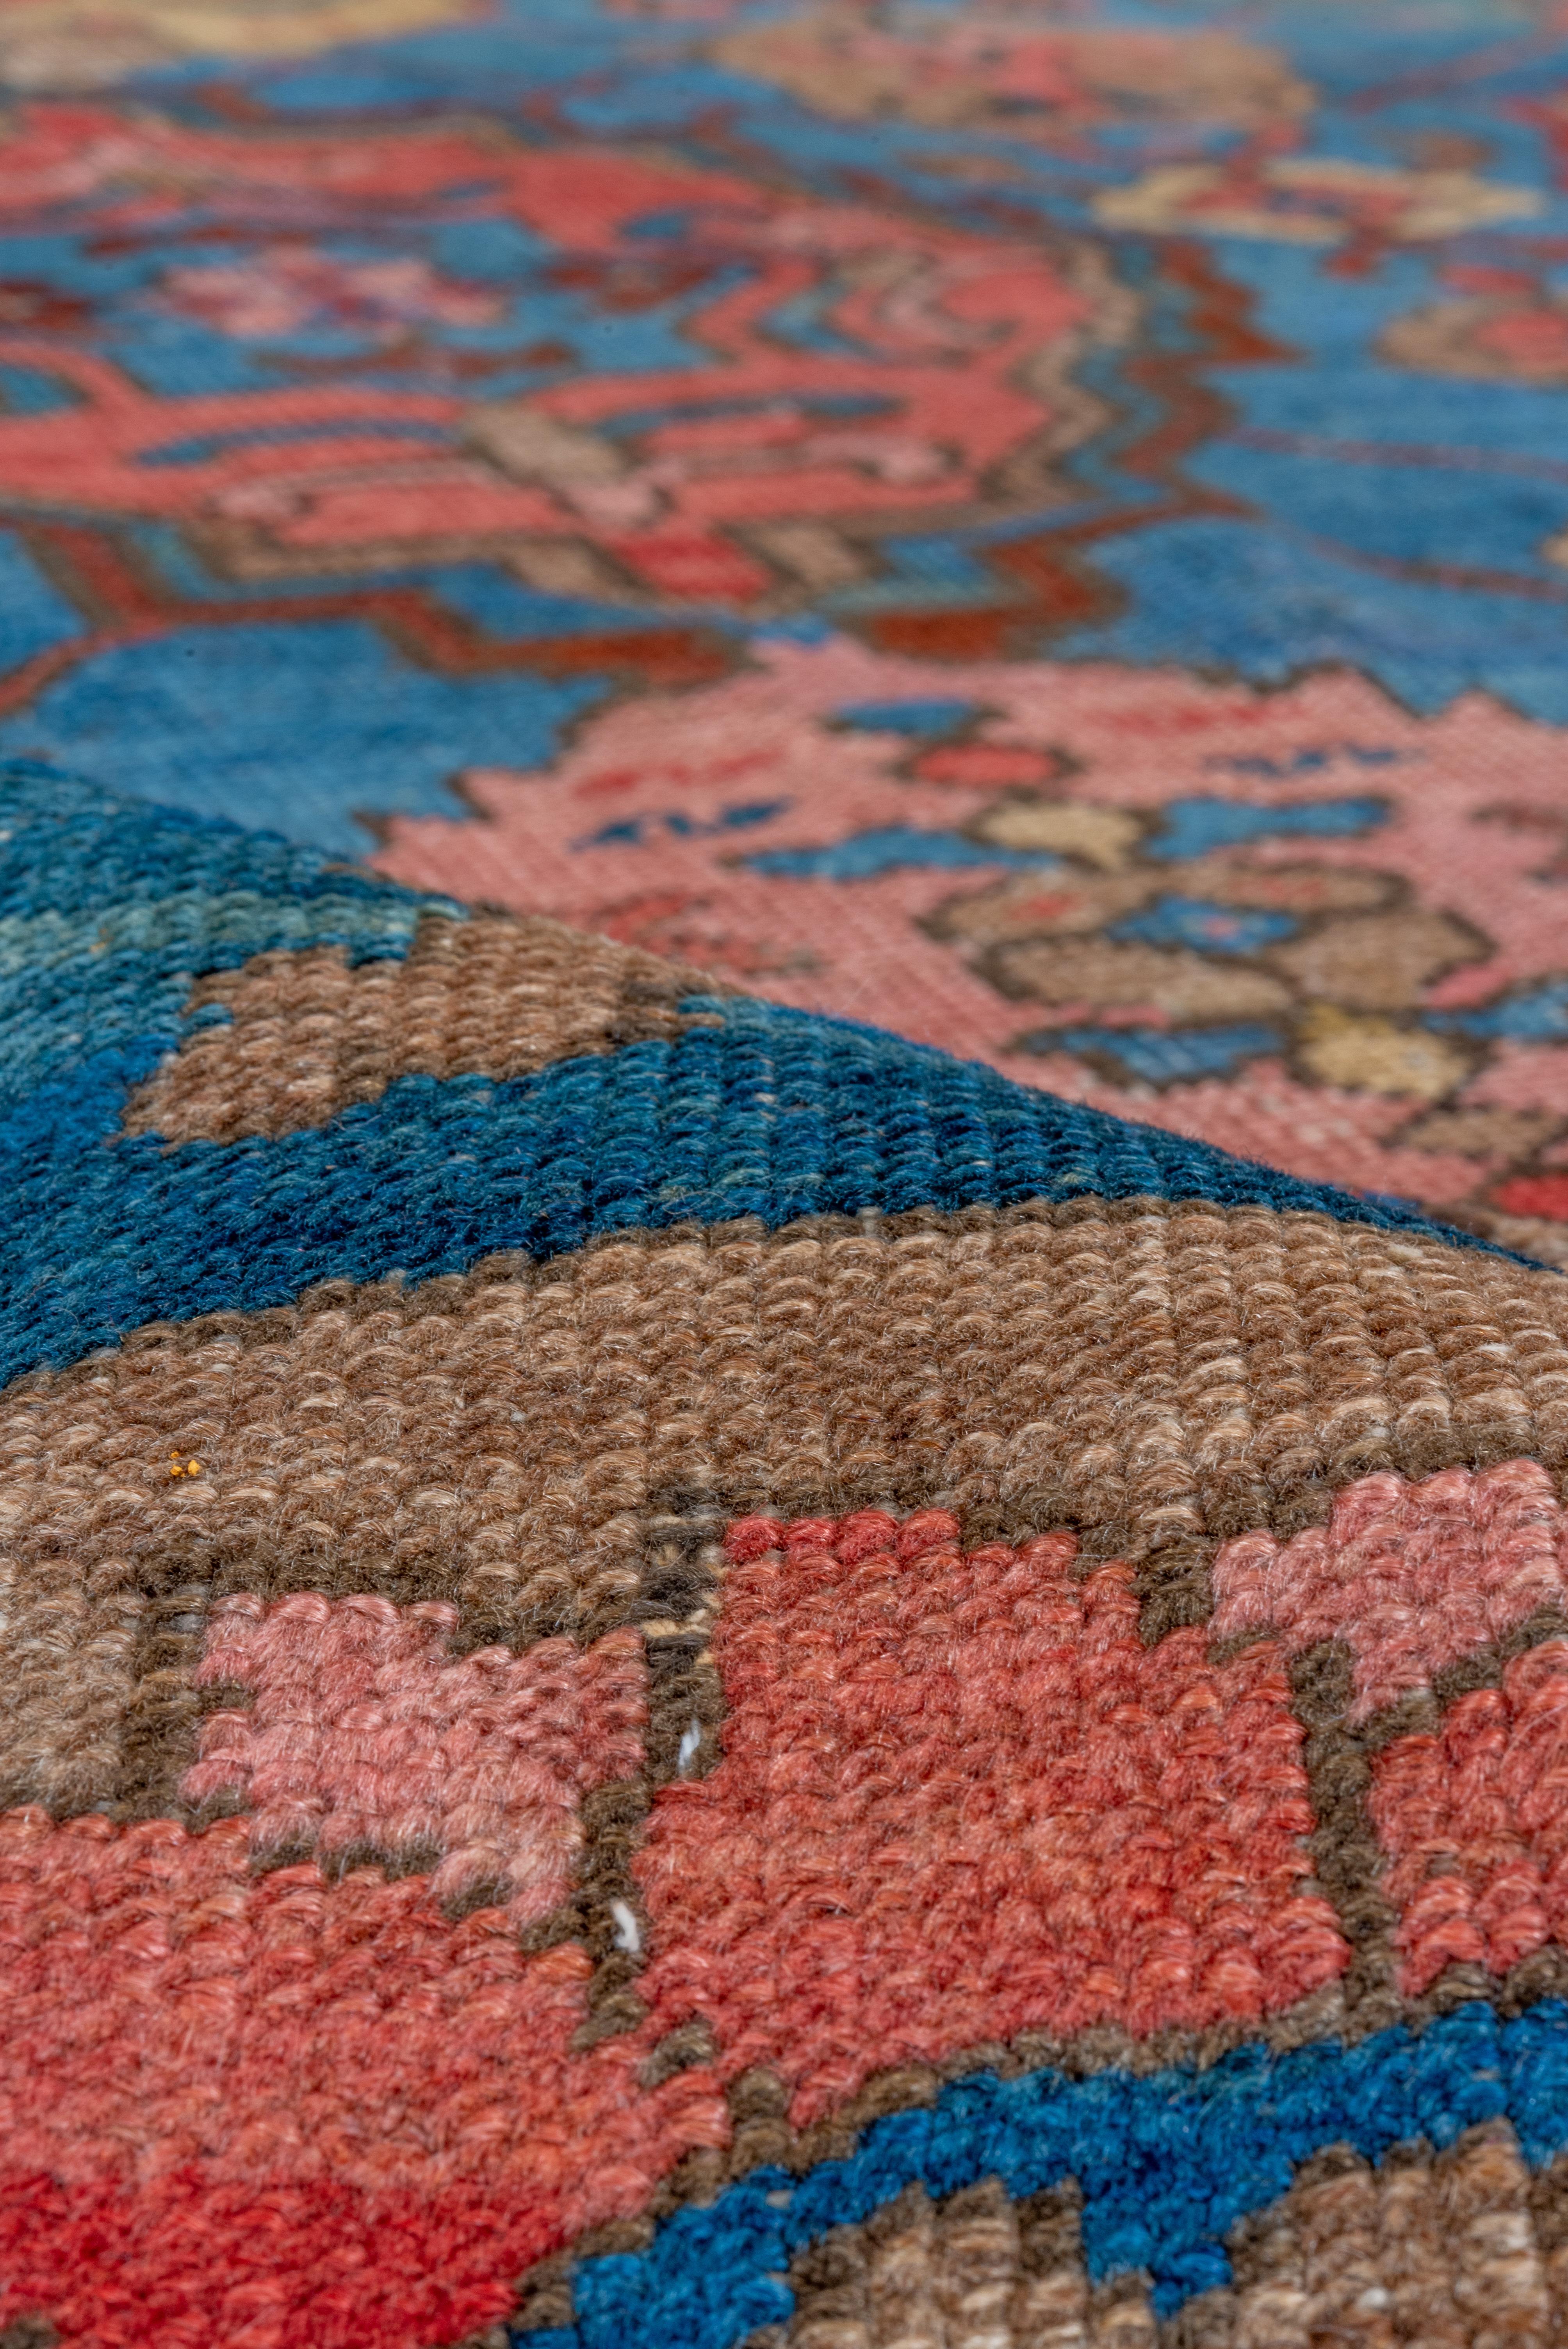 This magnificent antique NW Persian rustic carpet features a blue field with an allover pattern of rounded cartouches, hexagons and related forms, accented in red, ecru, rust, rose and straw. Wide strip-style border with bold reversing turtles.